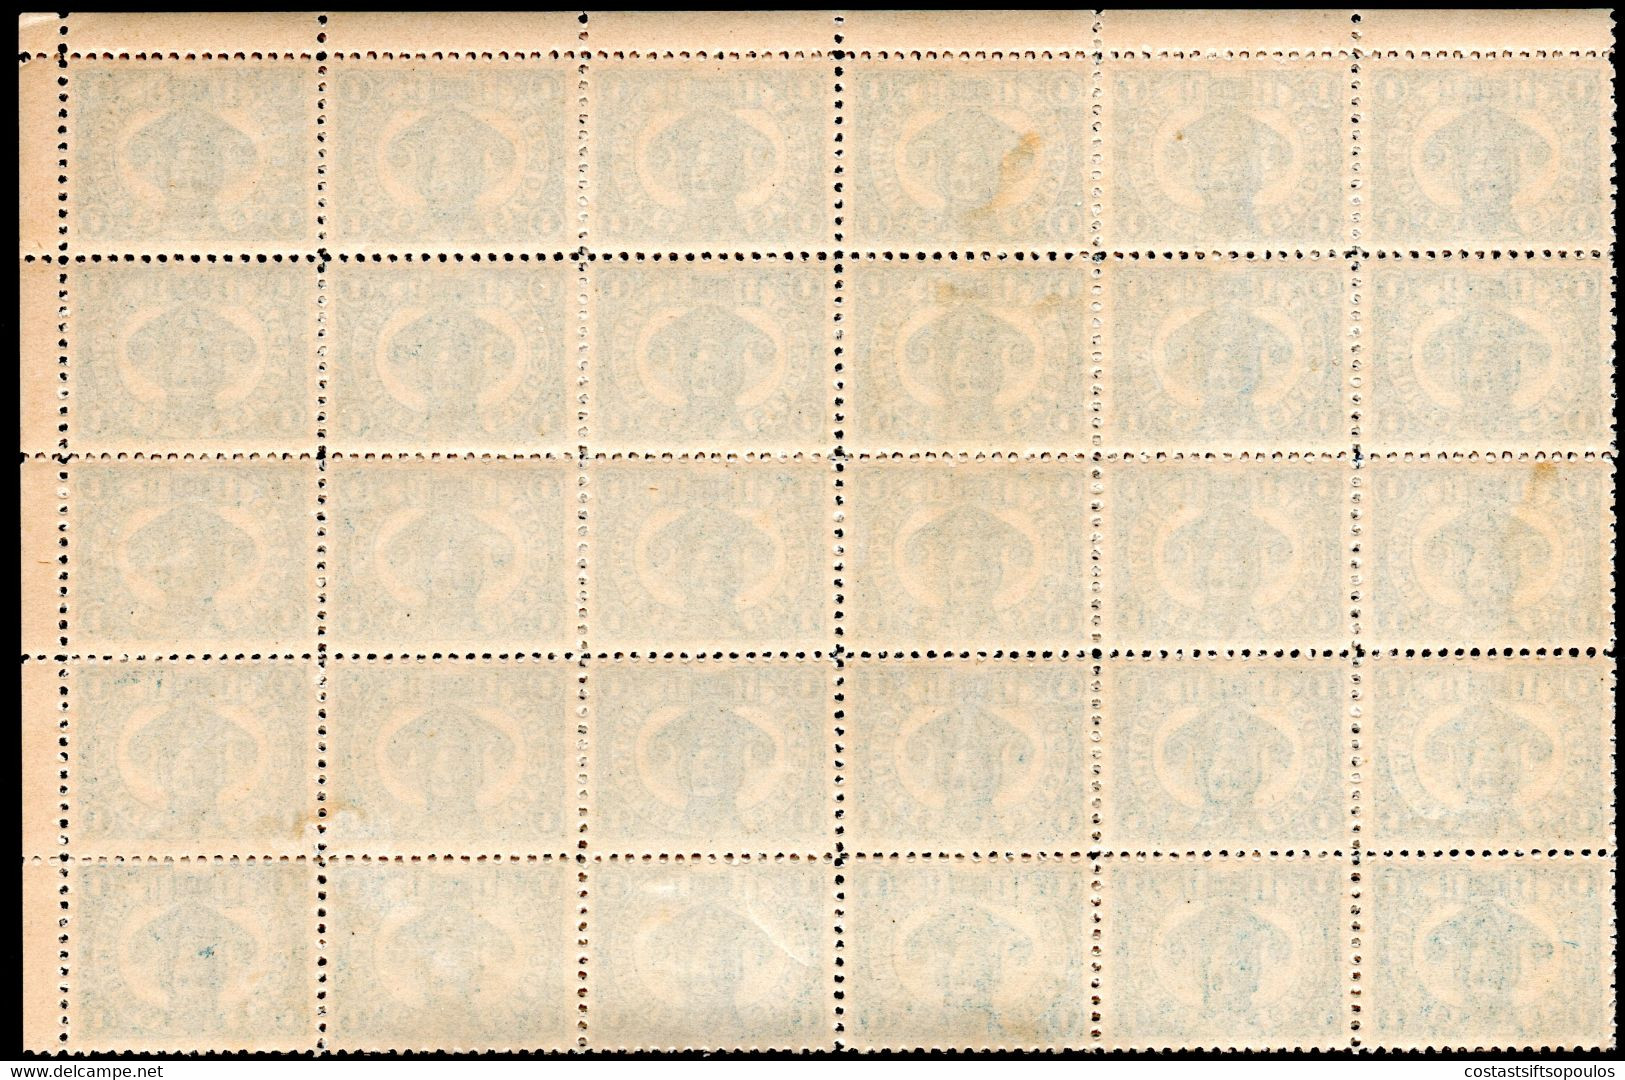 147.SWEDEN LOCAL,1887 STOCKHOLMS STADSPOST 1 ORE,MNH SHEET OF 60,FOLDED IN THE MIDDLE - Emissioni Locali